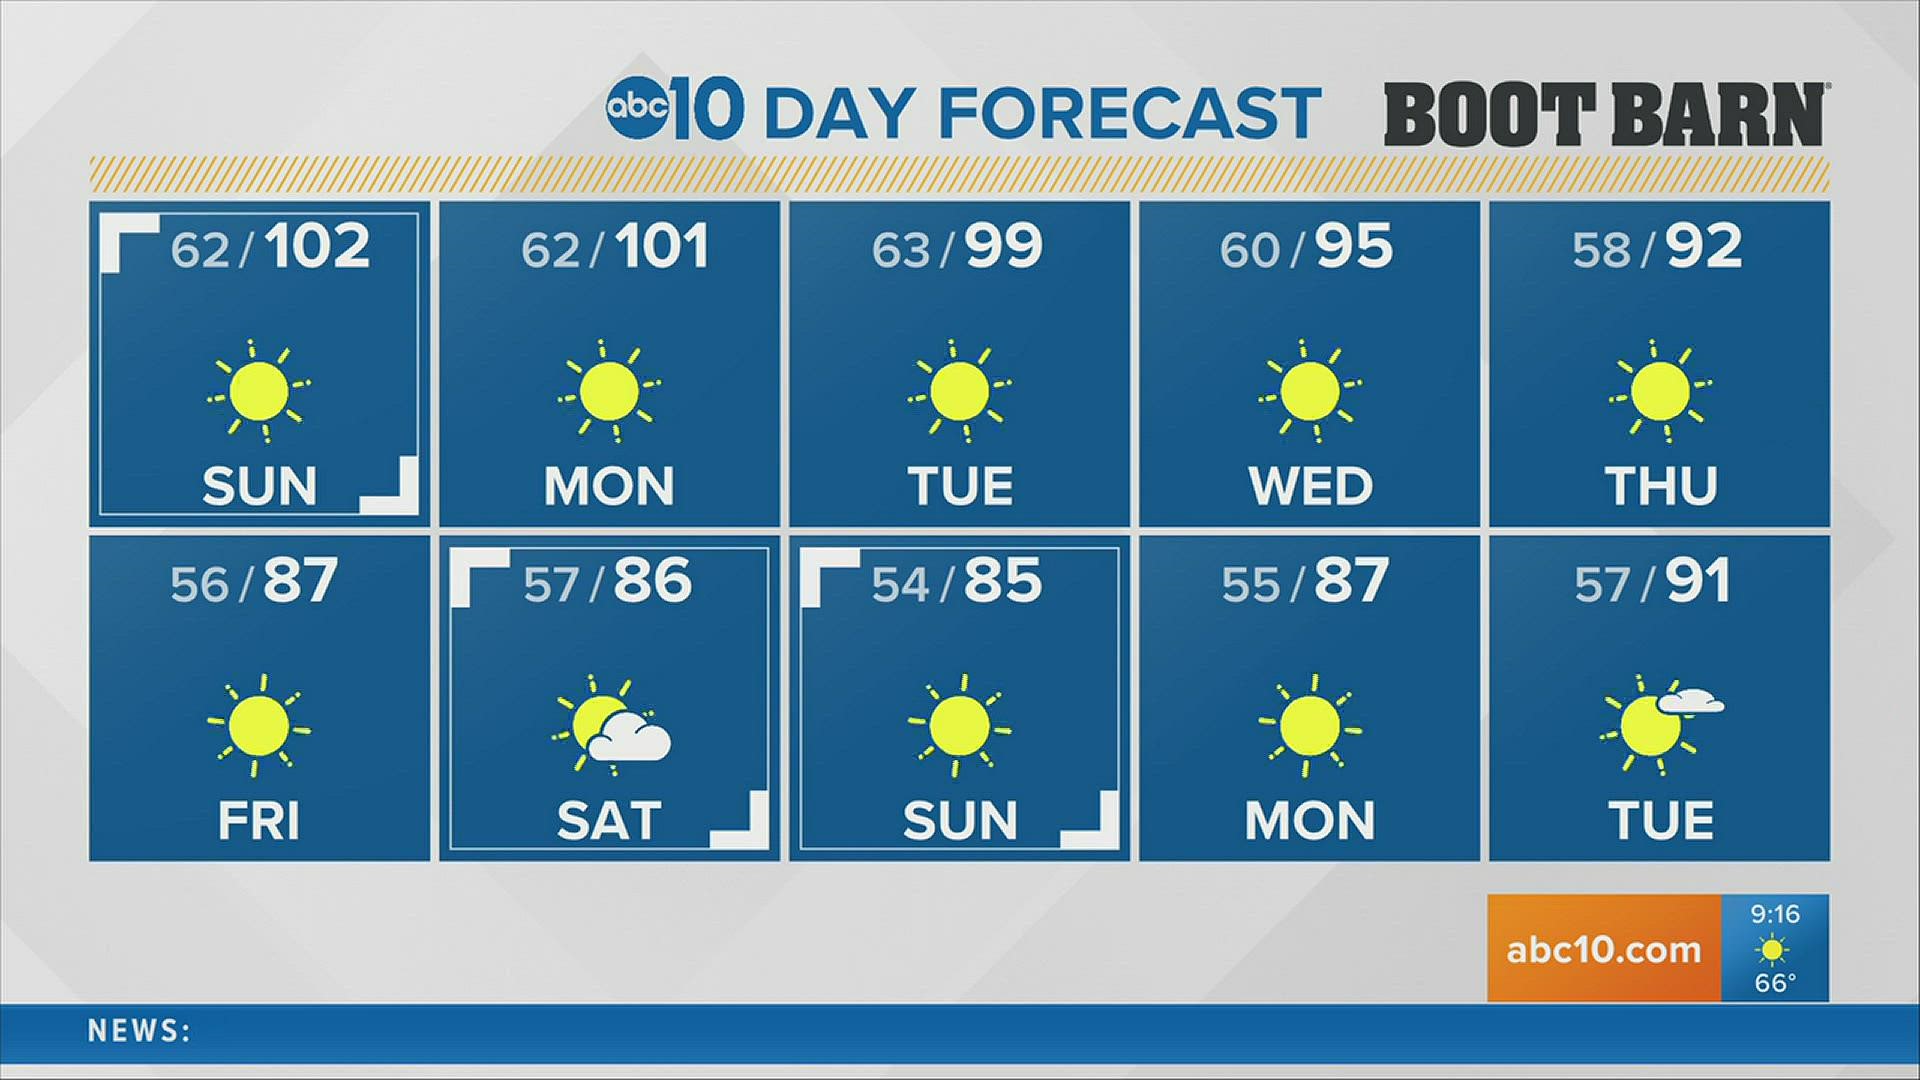 ABC10 Meteorologist Carley Gomez shows us what the next 10 days of weather will look like.